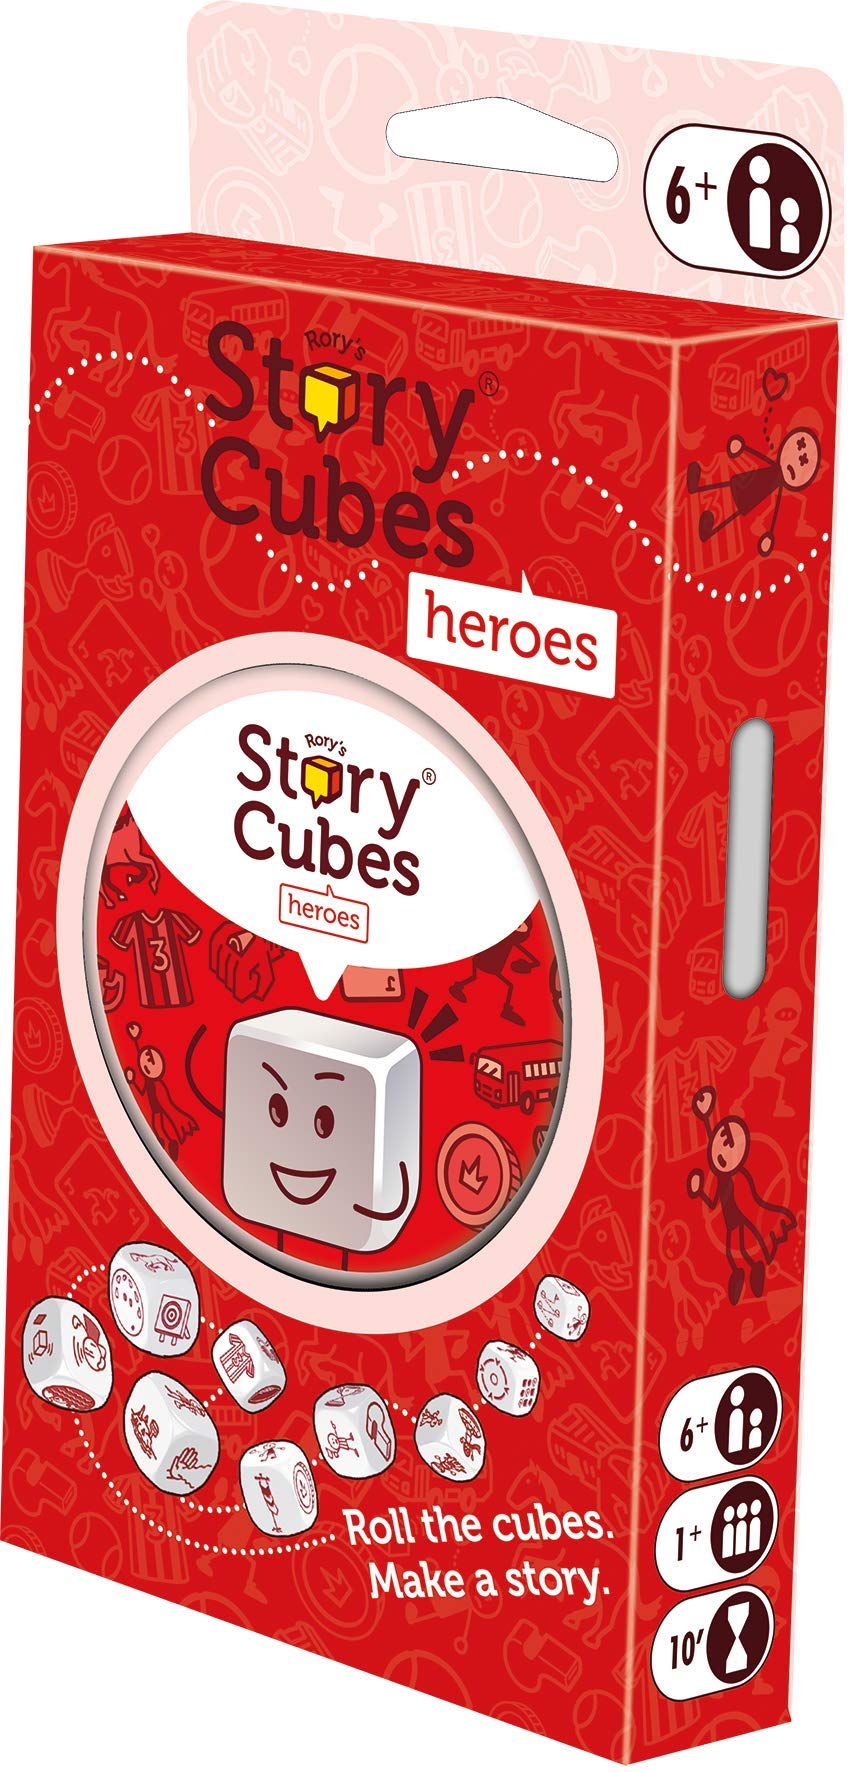 Rory's Story Cubes - Heroes - Loaded Dice Barry Vale of Glamorgan CF64 3HD